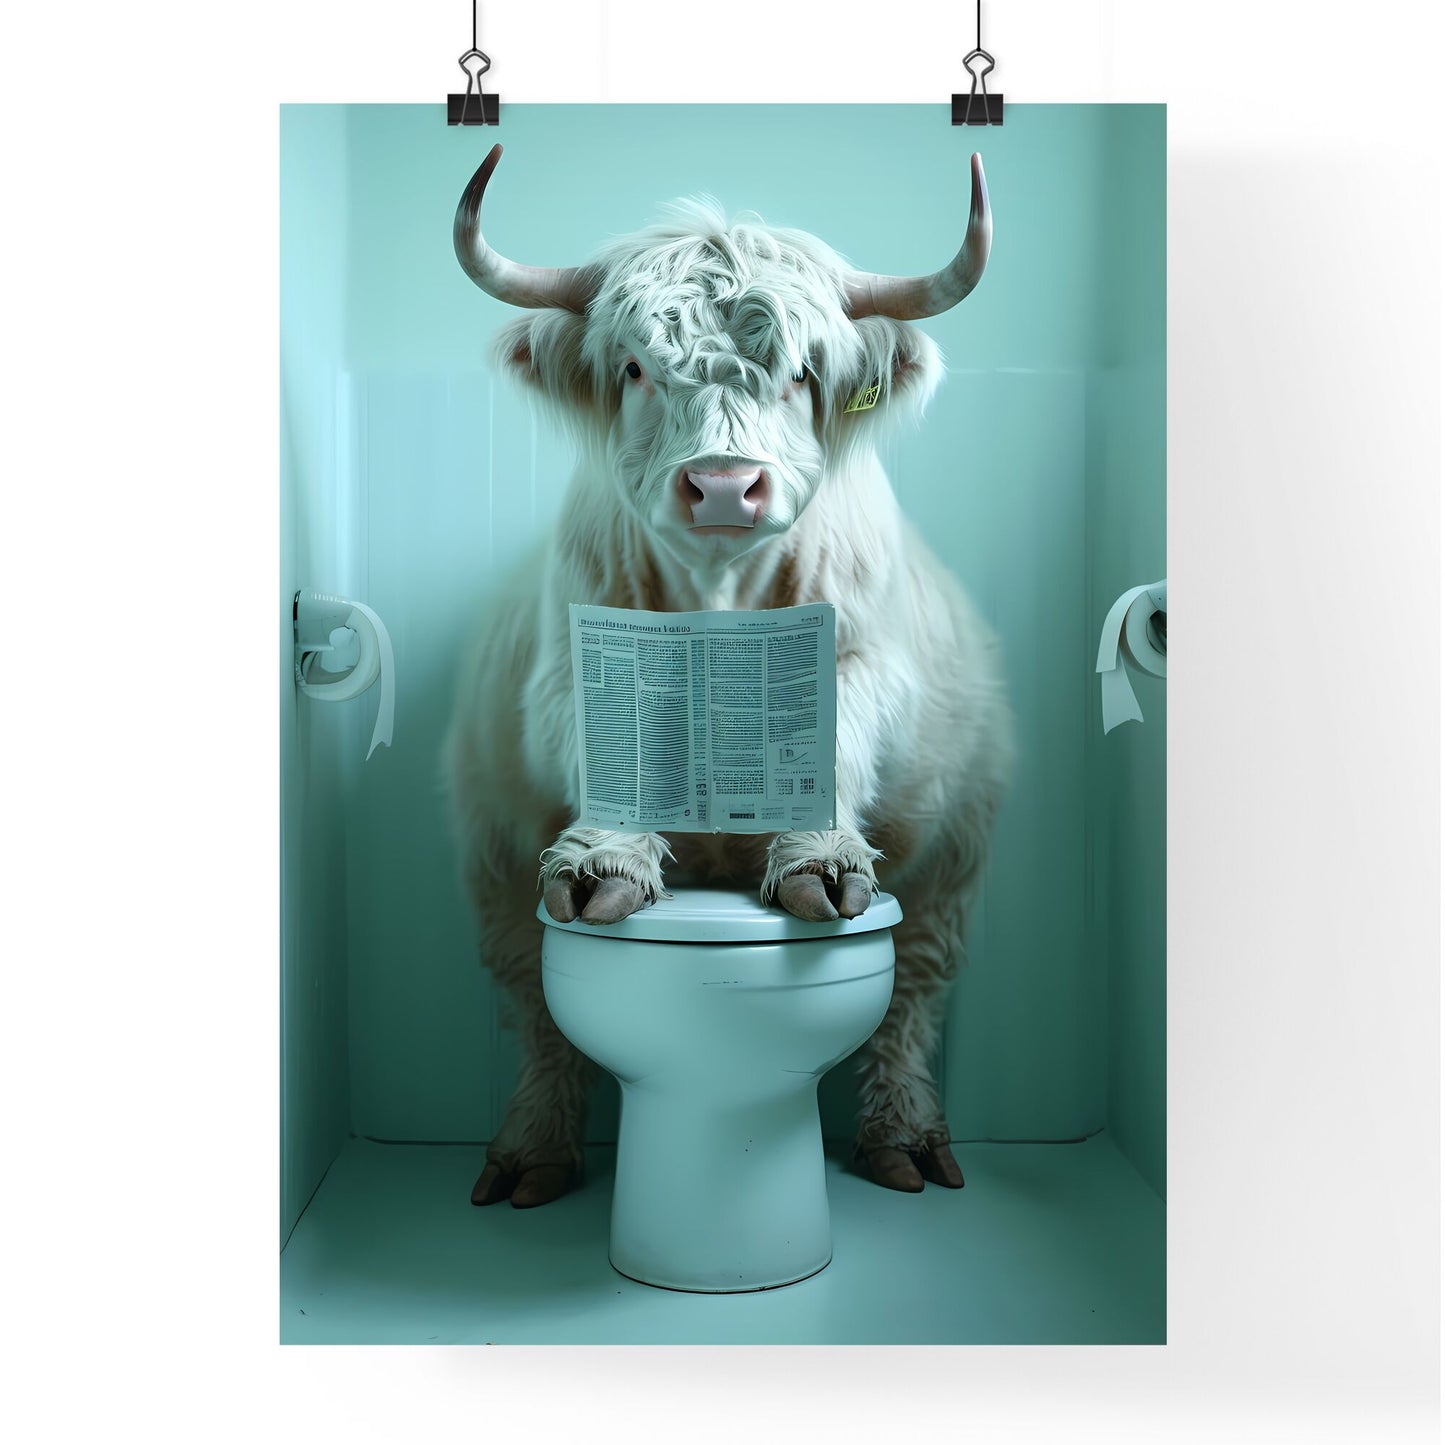 A cow sitting on a tiny toilet - Art print of a cow sitting on a toilet Default Title